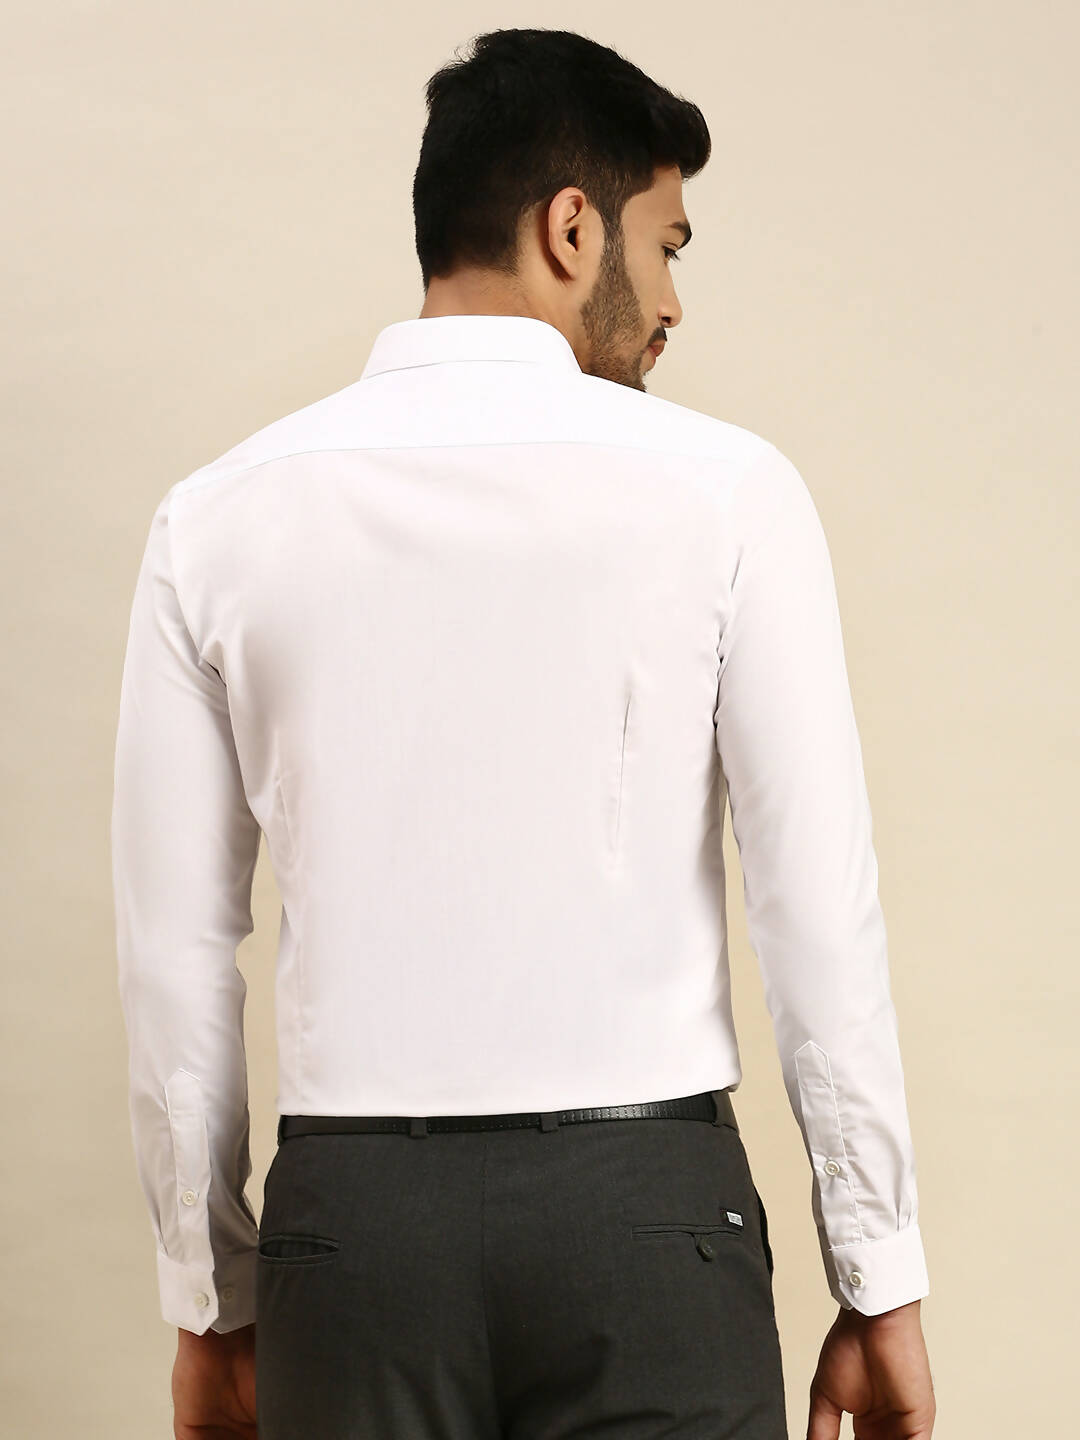 Buy White Shirts for Women by Kazo Online